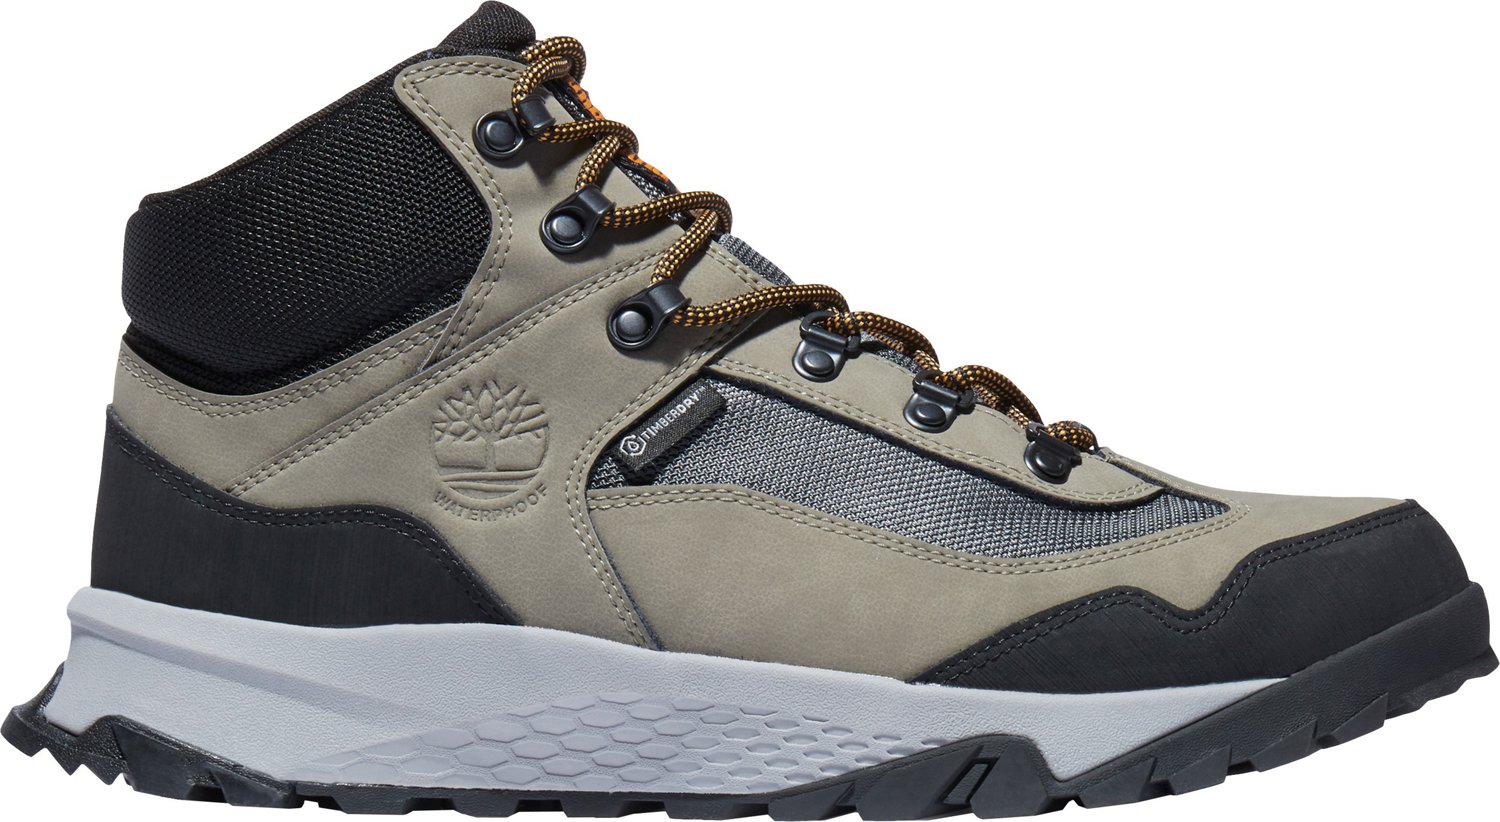 Timberland Men's Lincoln Peak Mid Lite WP Hiking Boots | Academy